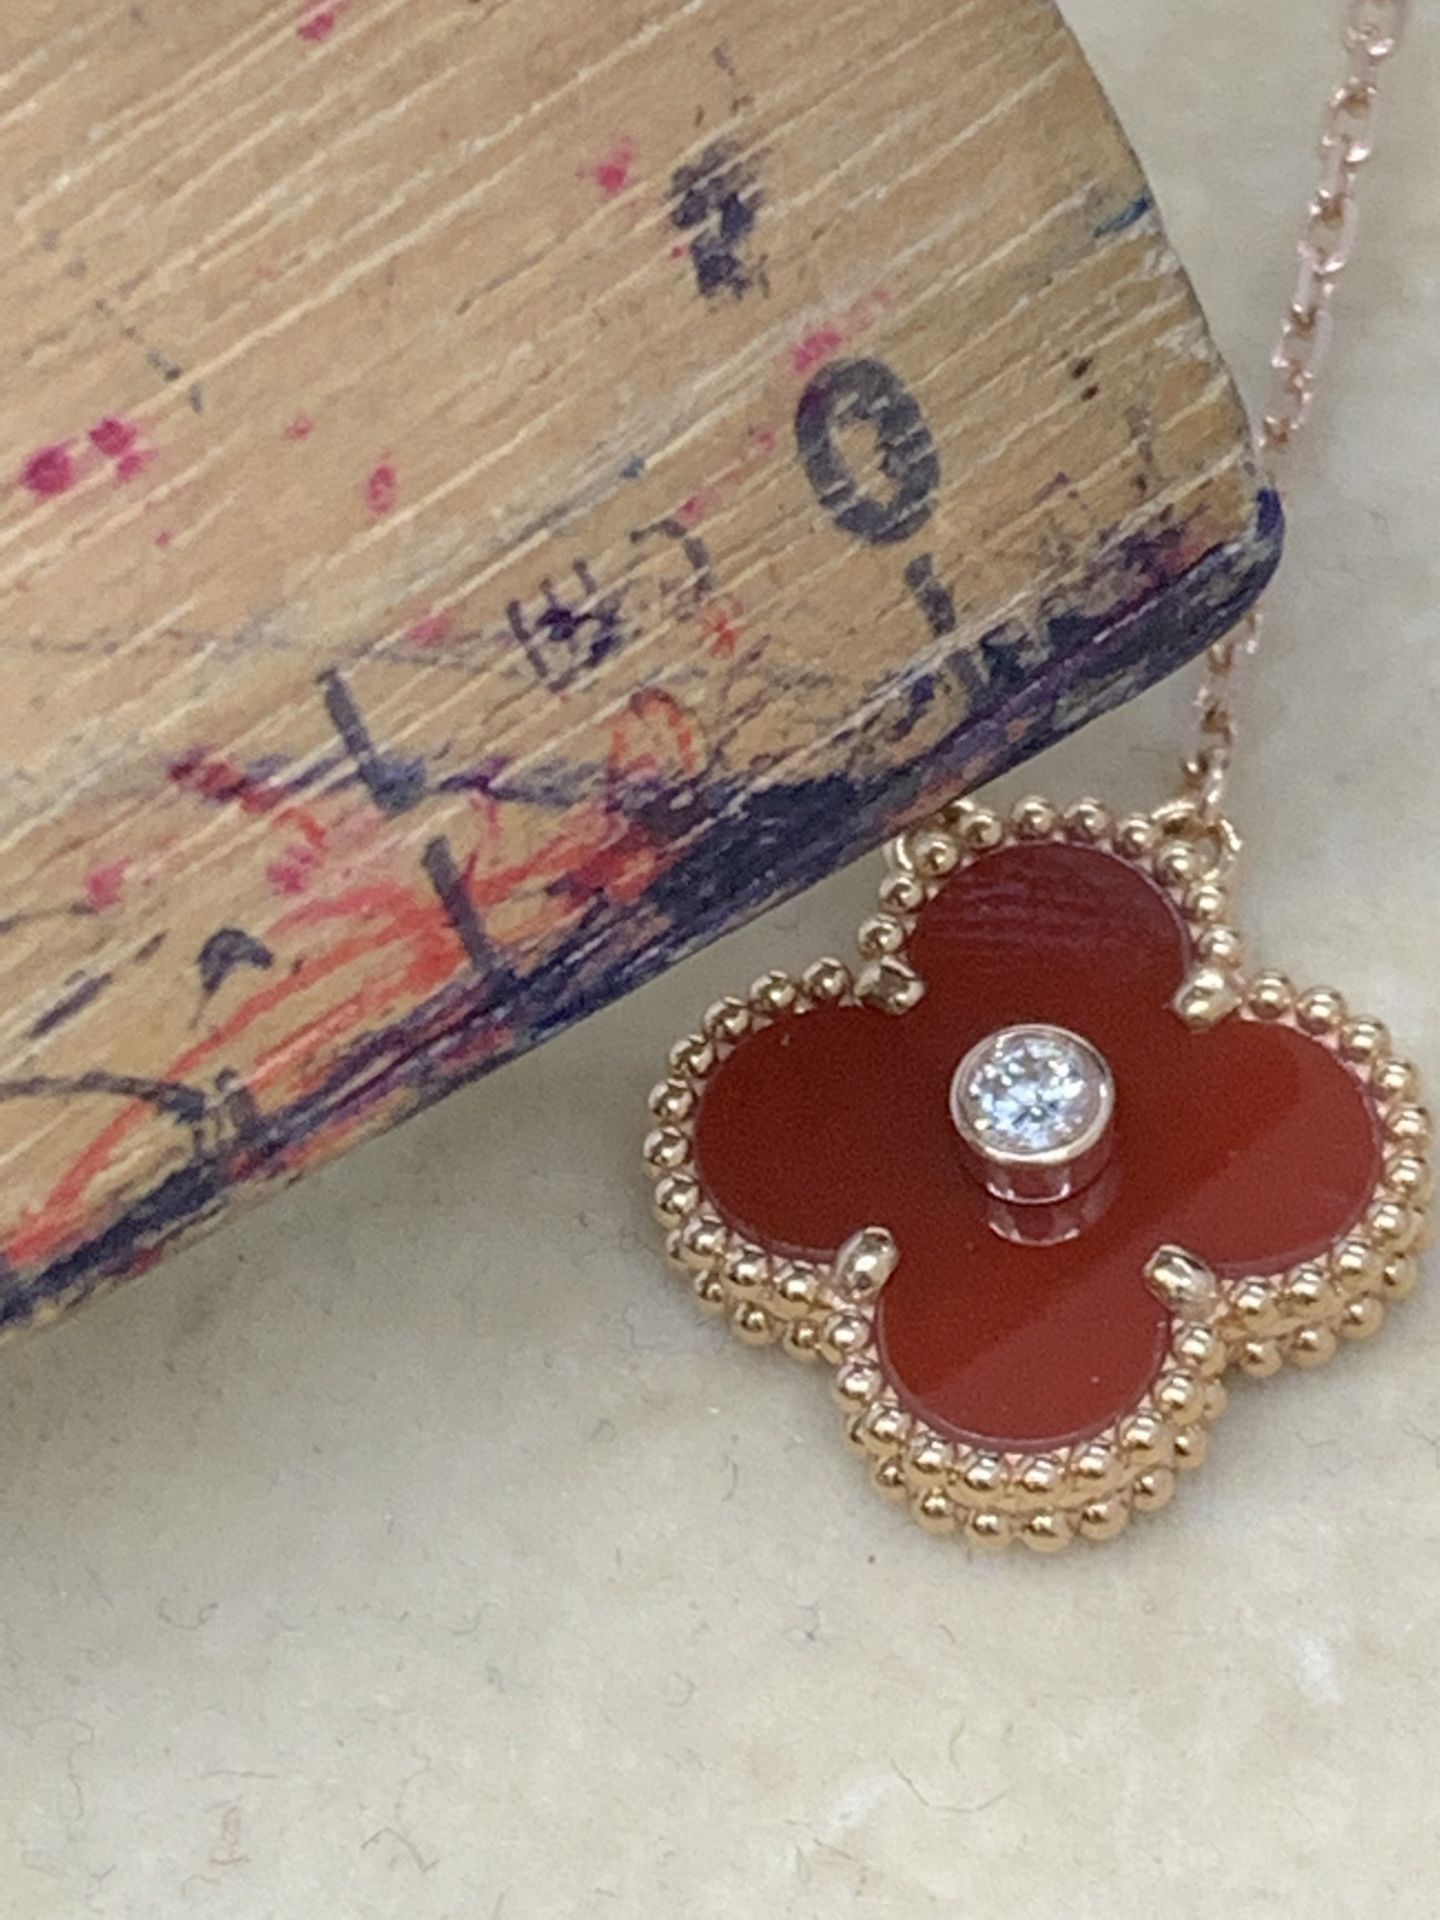 18 carat rose gold Diamond set pendant and chain marked VCA 750 - Image 3 of 7